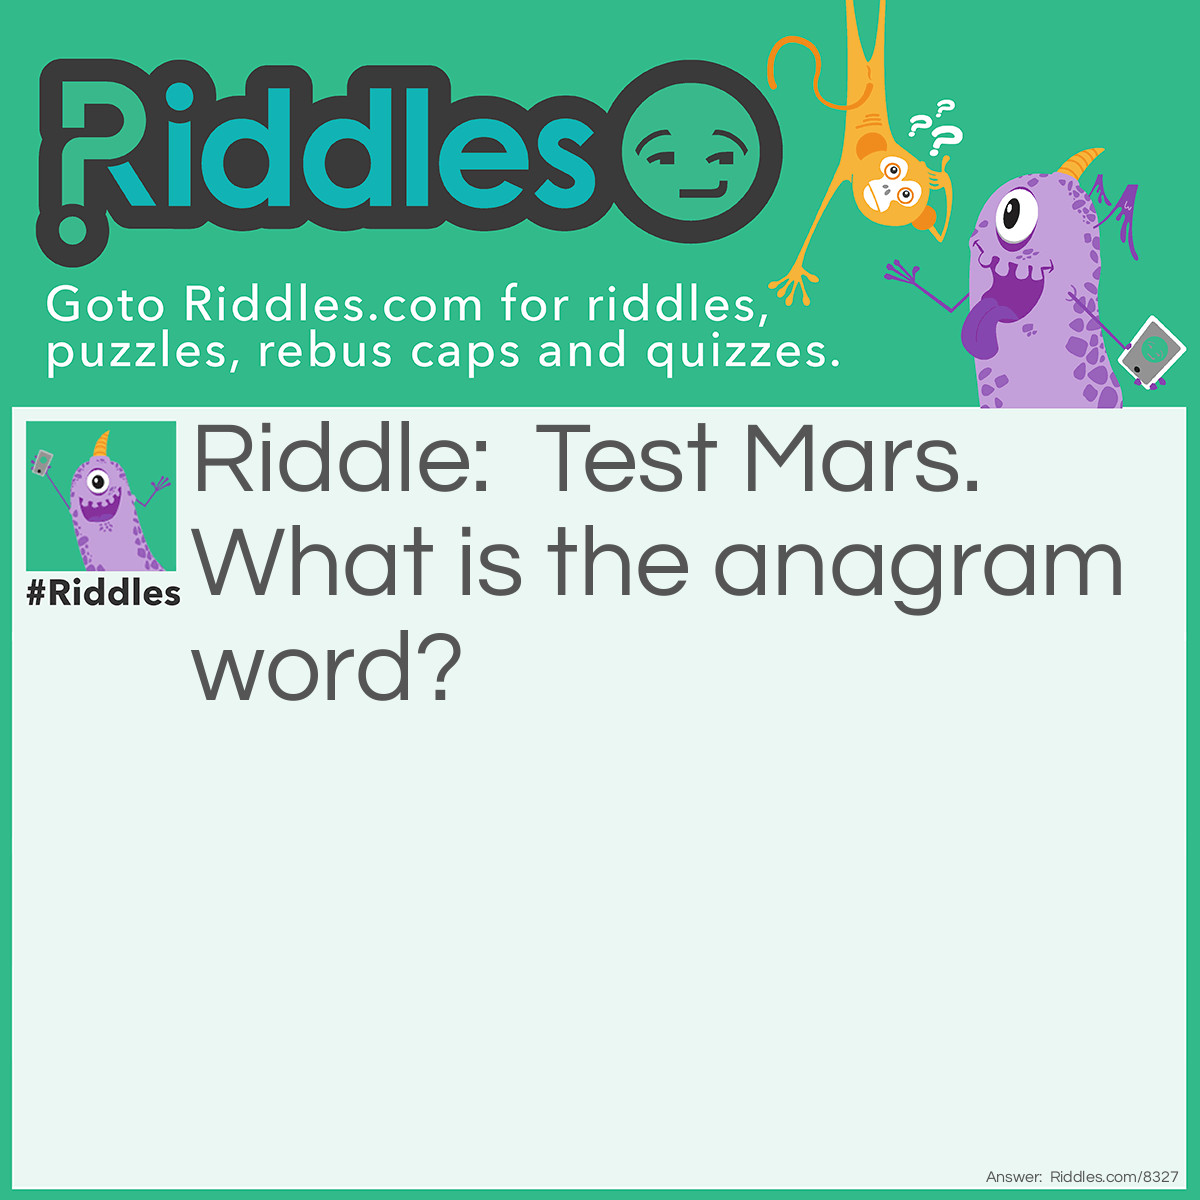 Riddle: Test Mars. What is the anagrammed word? Answer: Smartest.